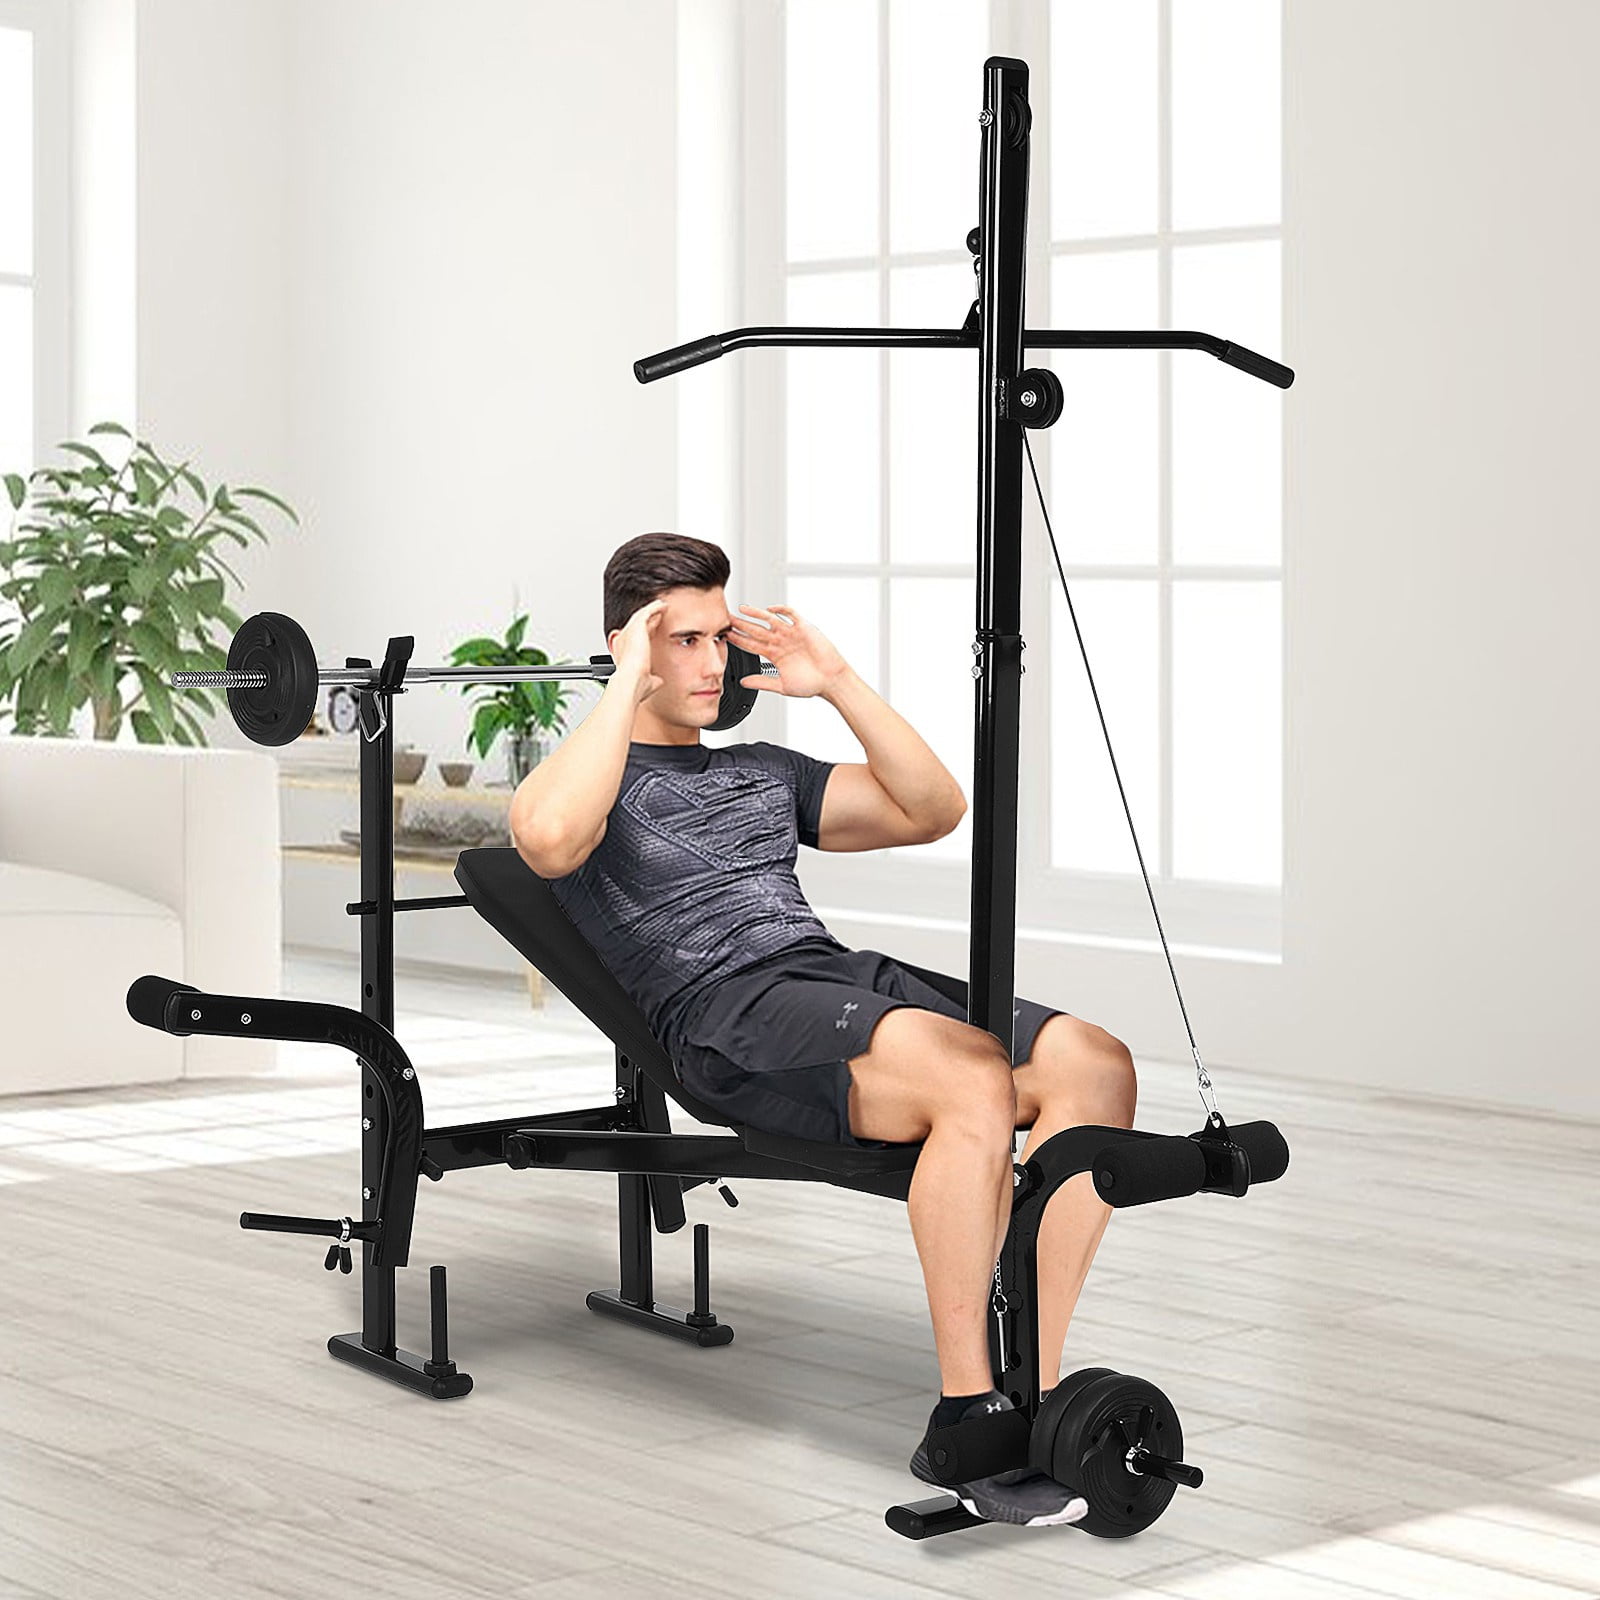 Details about   Adjustable Weight Bench Multi-Function Folding Fitness w/ Barbell Incline Seat 